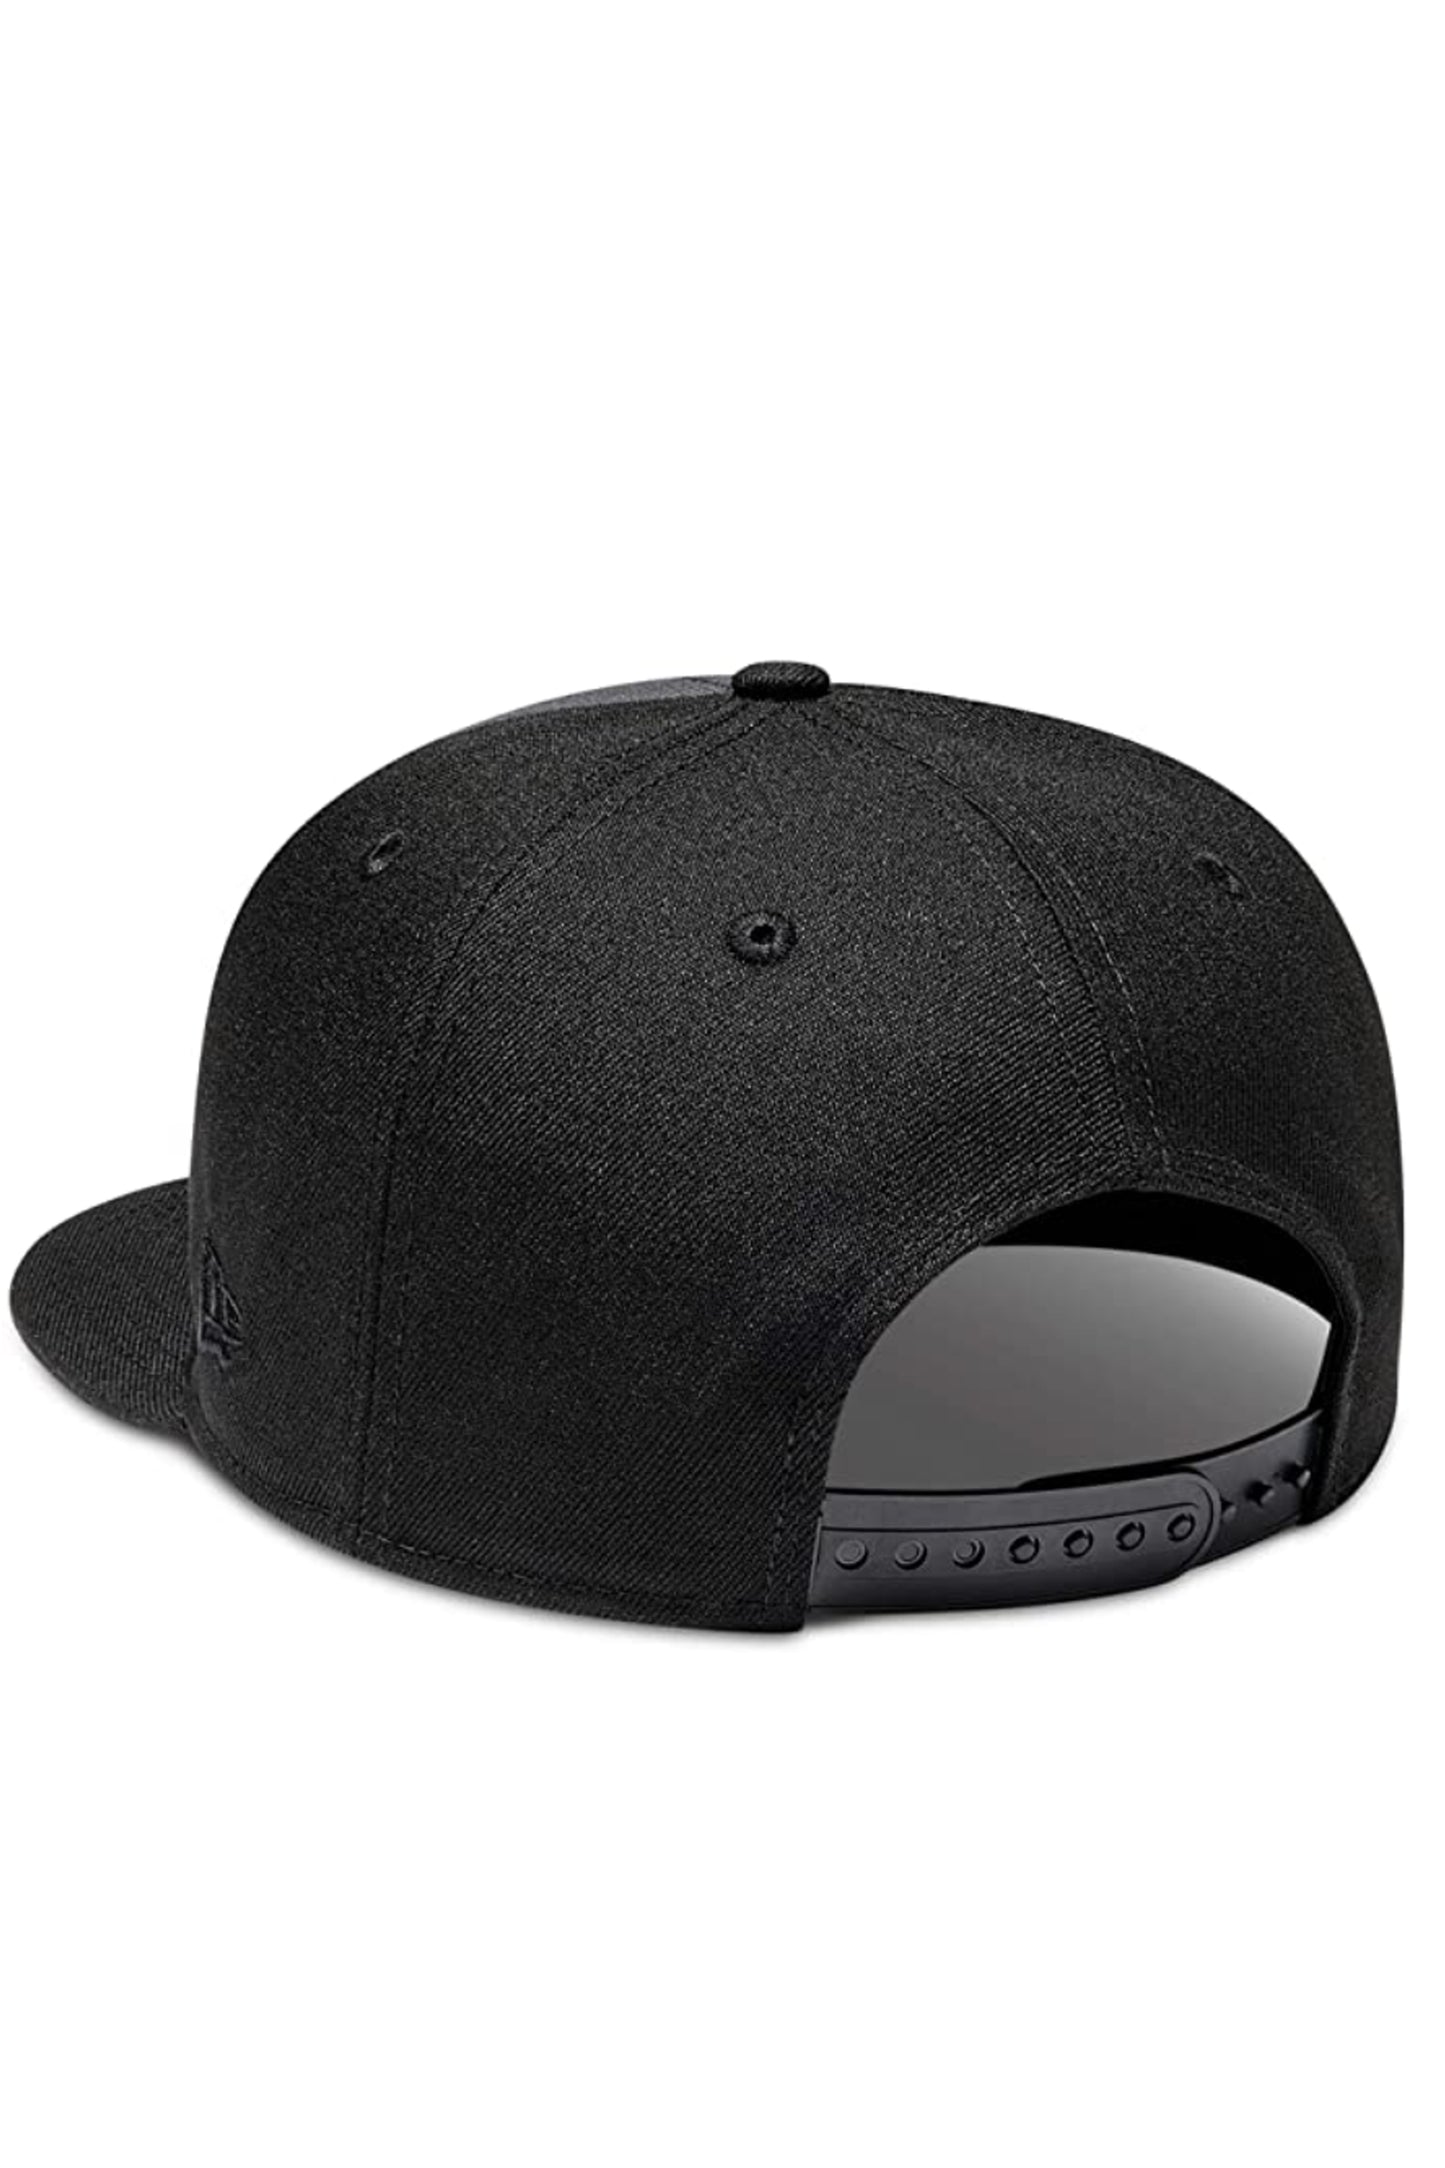 ImportWorx Silver Classic Circle 9FIFTY Embroidered Snapback Hat